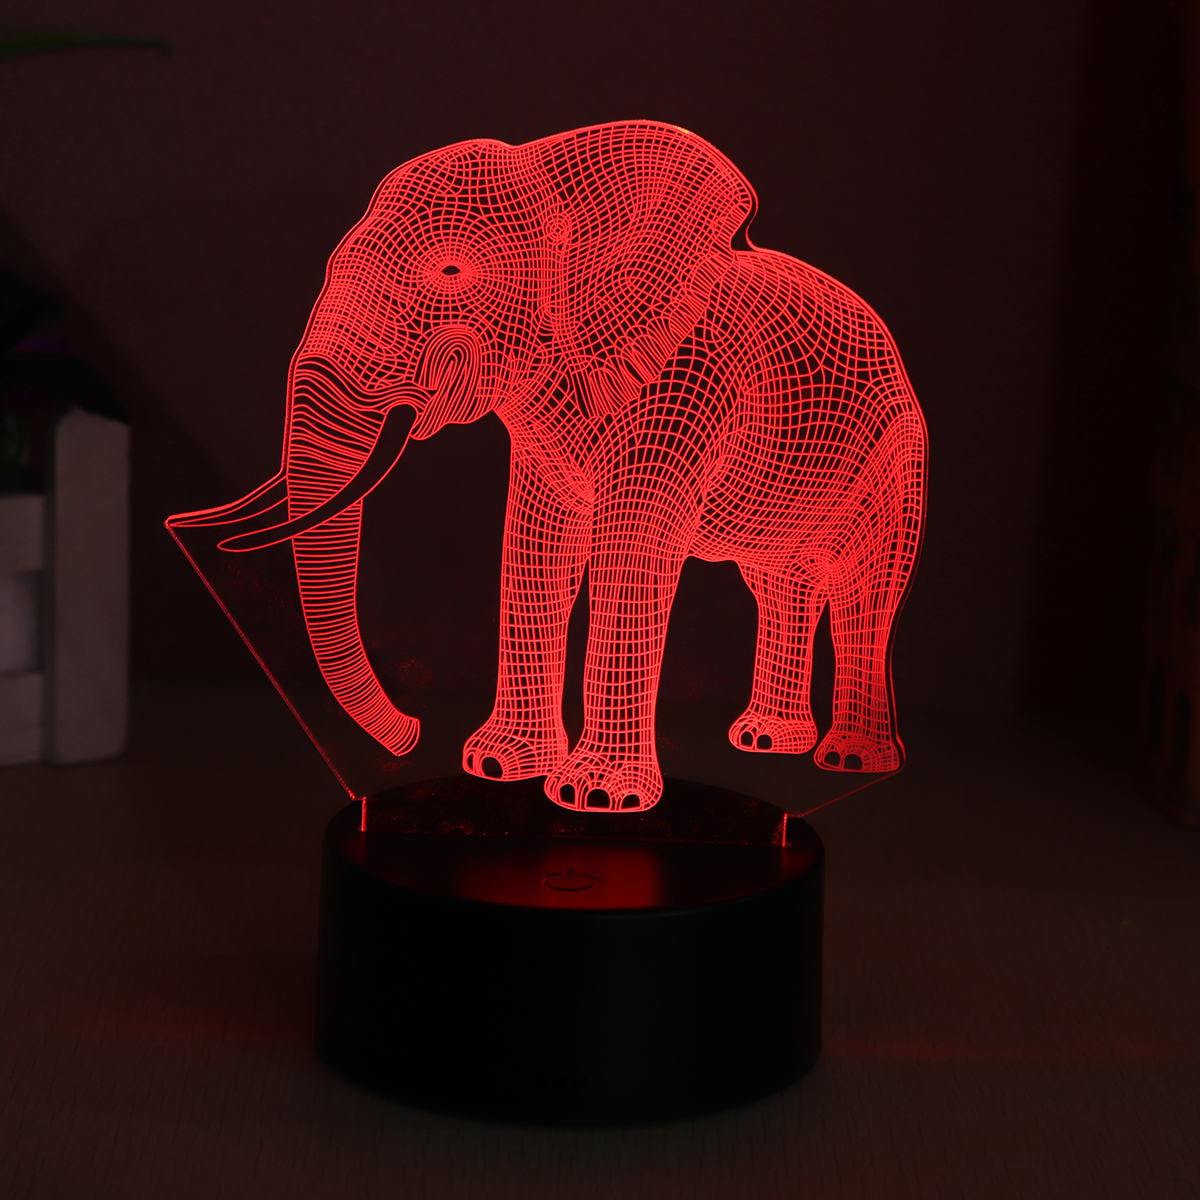 3D-Acrylic-LED-716-Colors-Colorful-Night-Lights-Elephant-Model-Remote-Control-Touch-Switch-Night-Lig-1370467-6